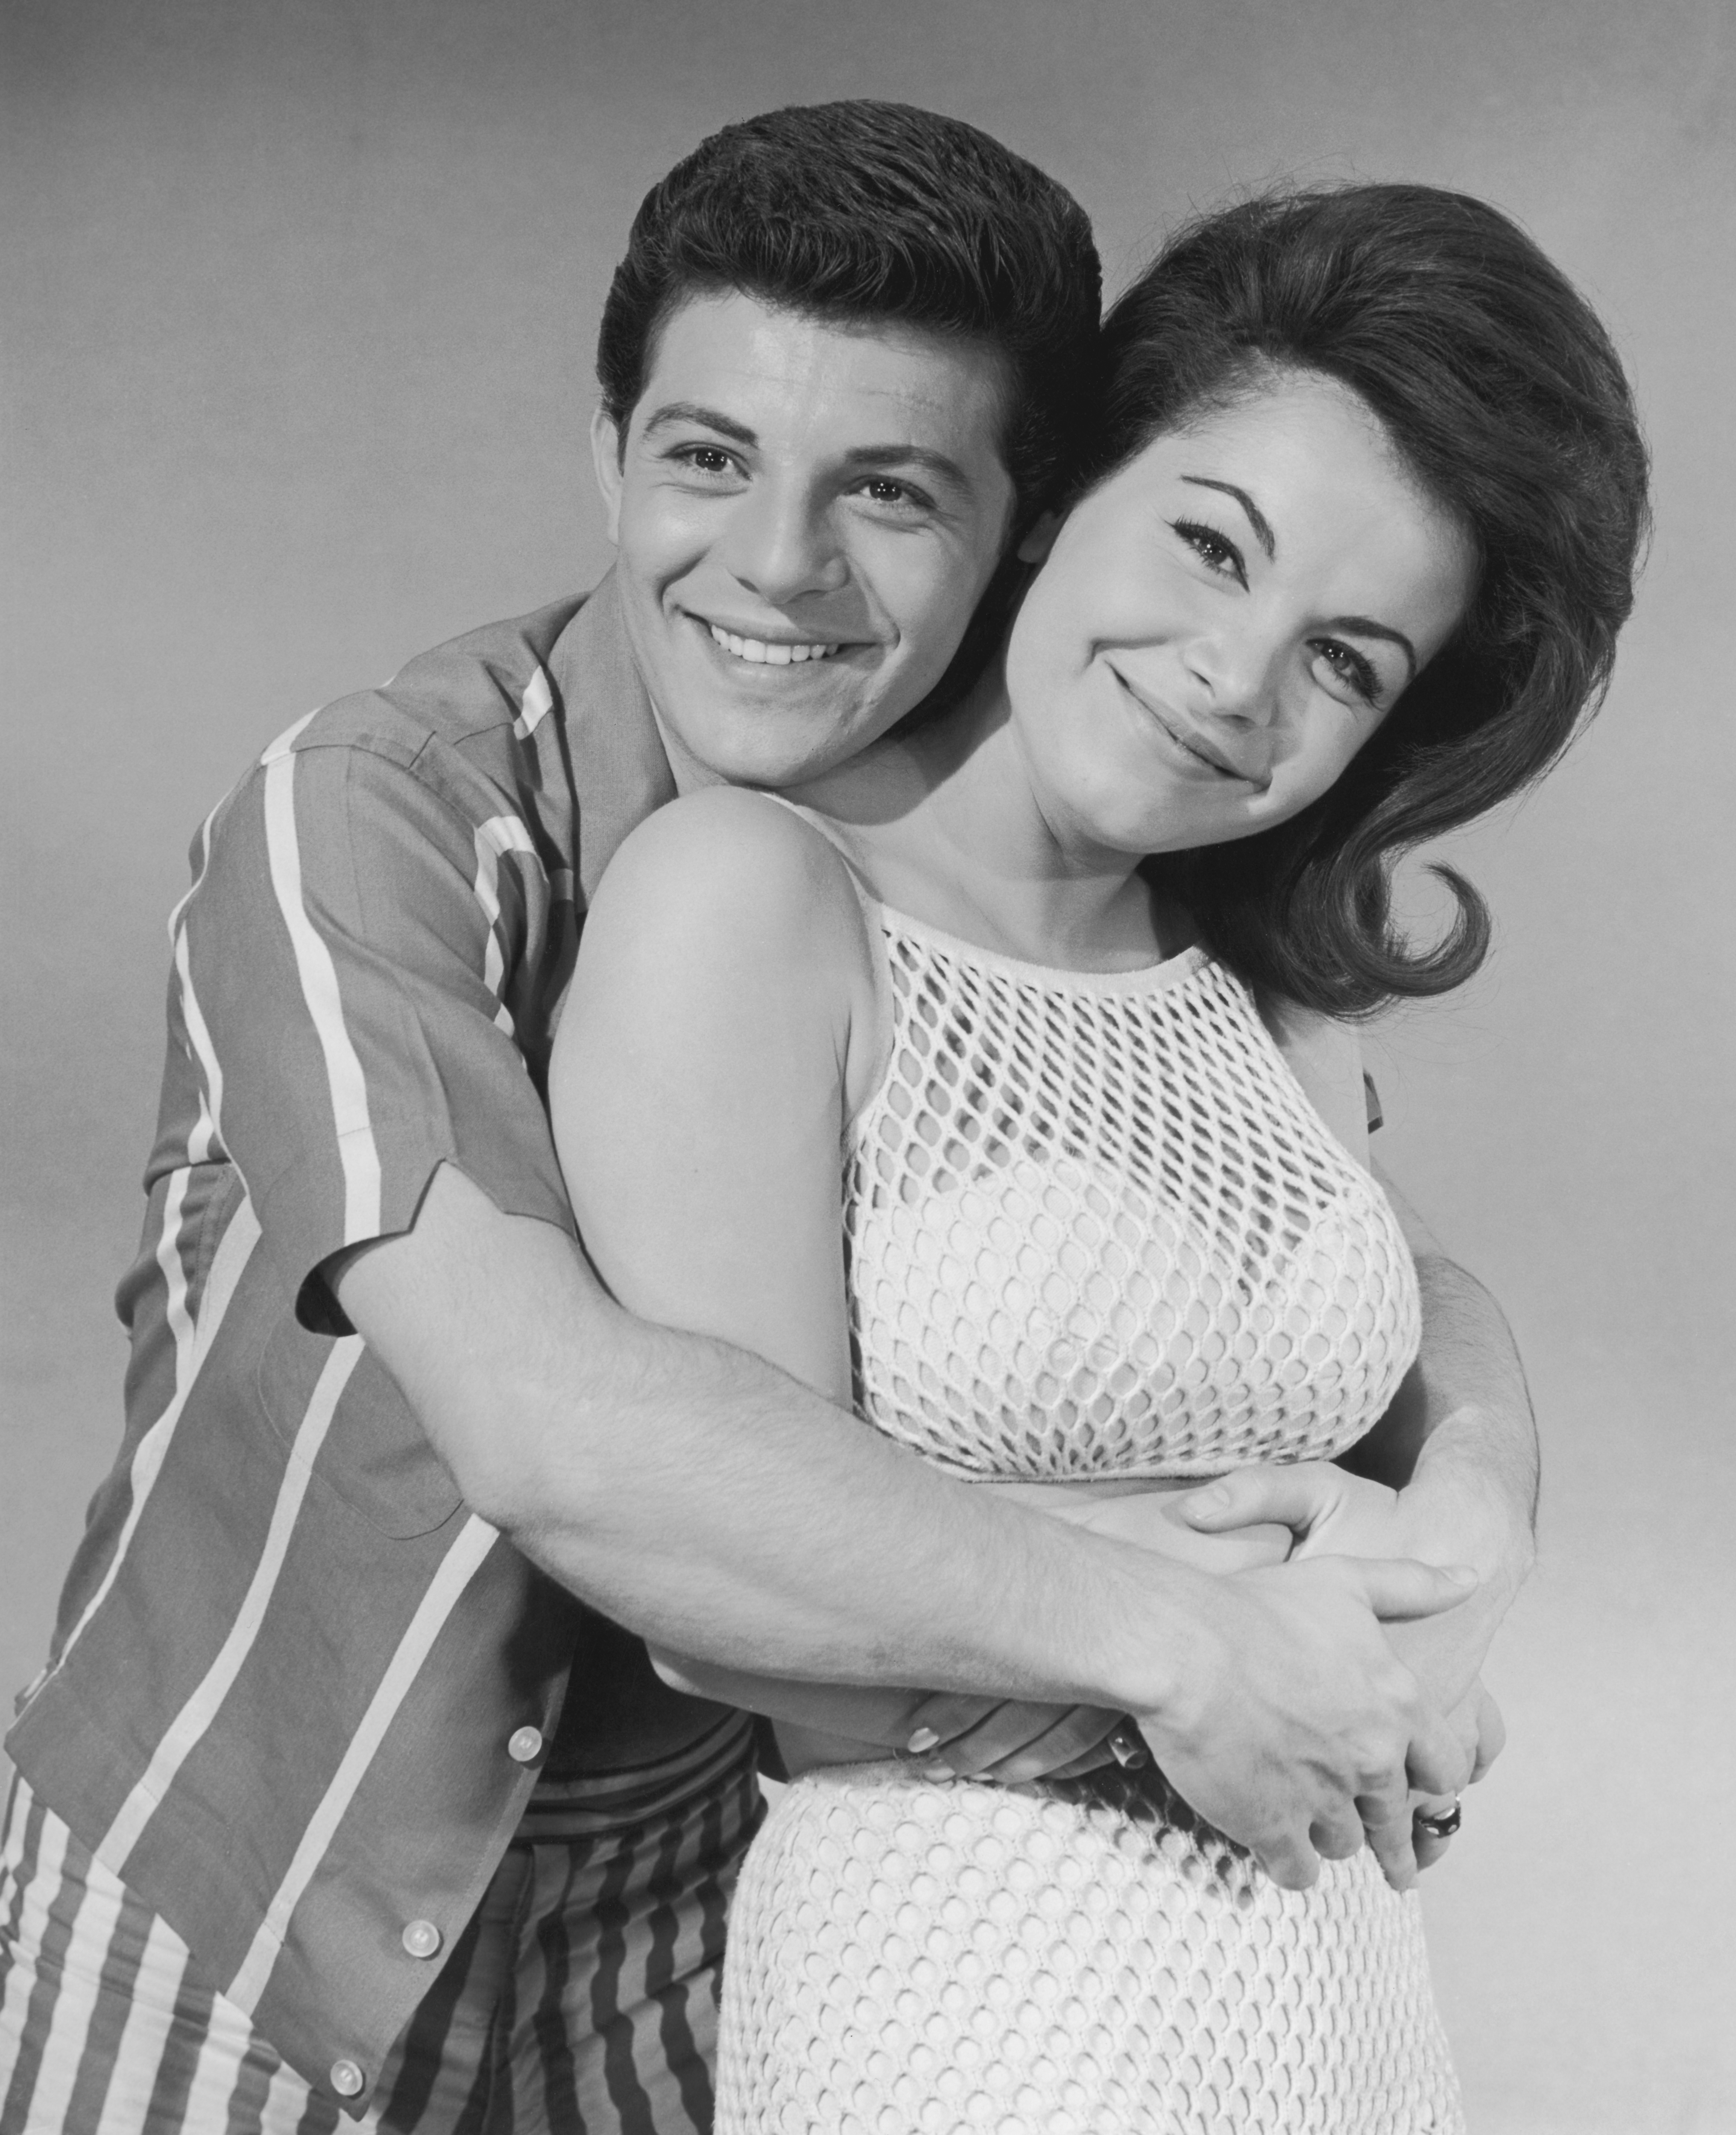 Frankie Avalon and Annette Funicello circa 1962. | Source: Getty Images